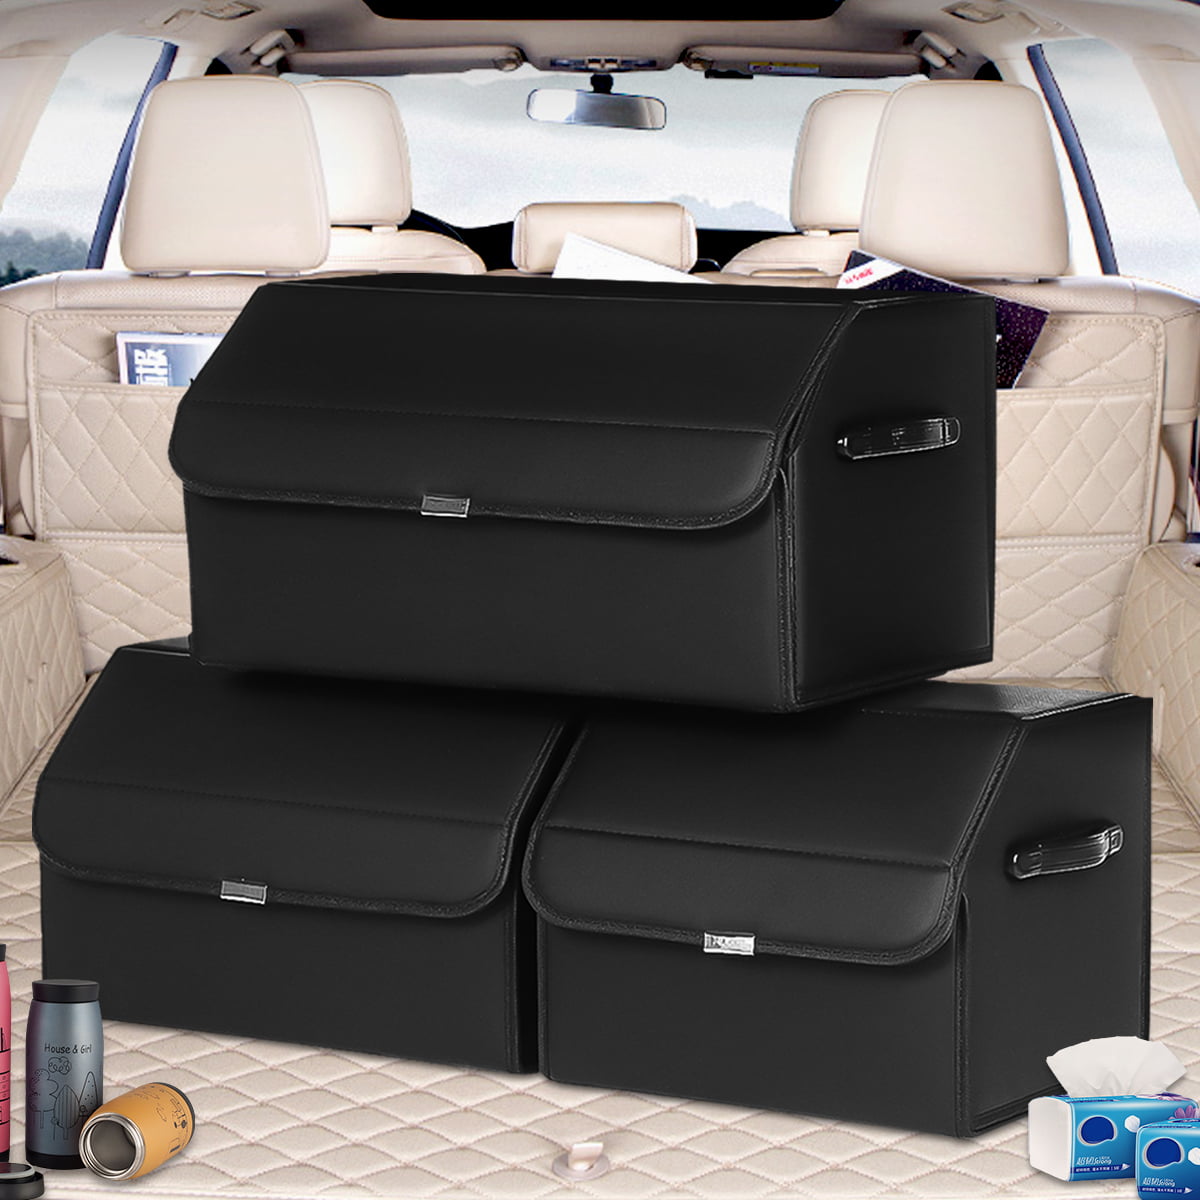 w/ small damage - see pic Car Trunk Organizer For Mercedes